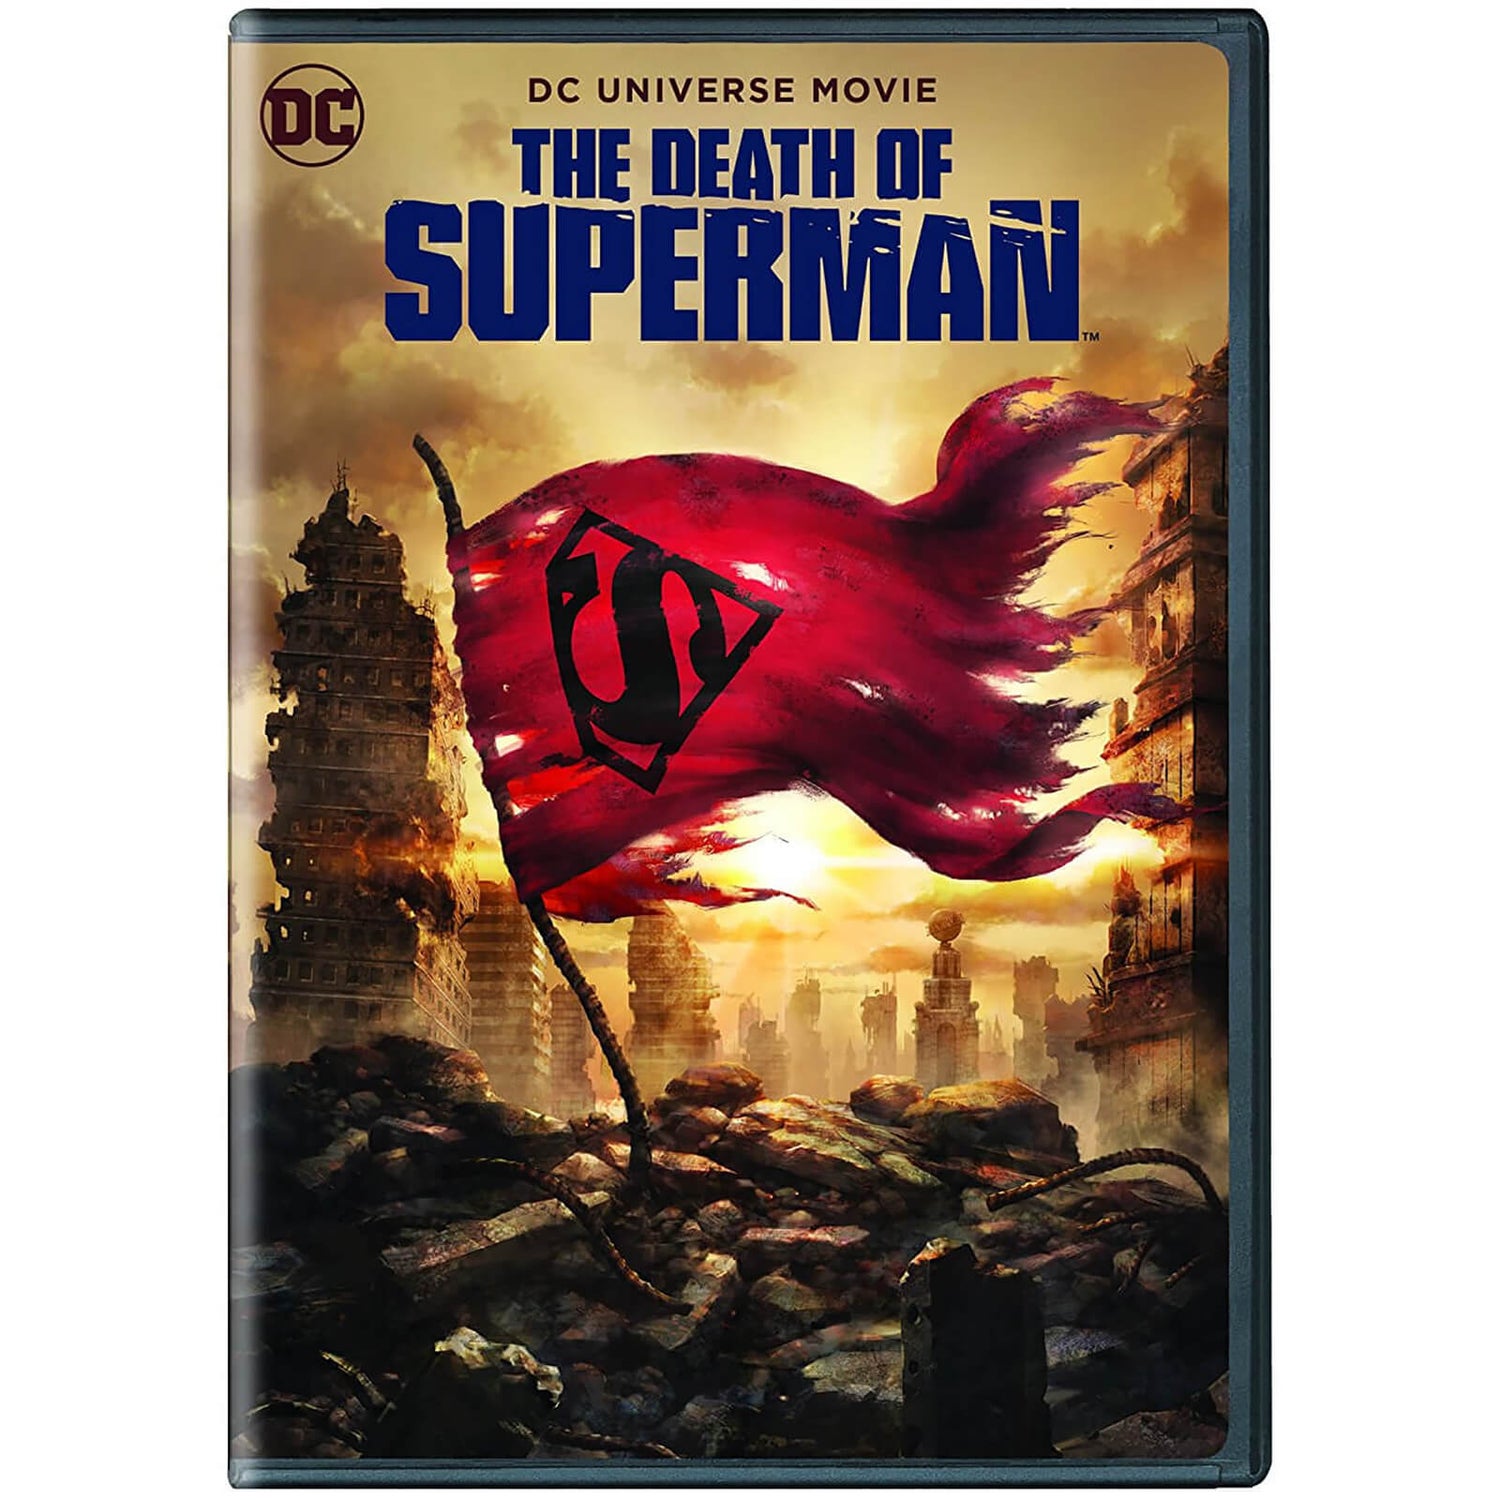 The Death of Superman Part 1